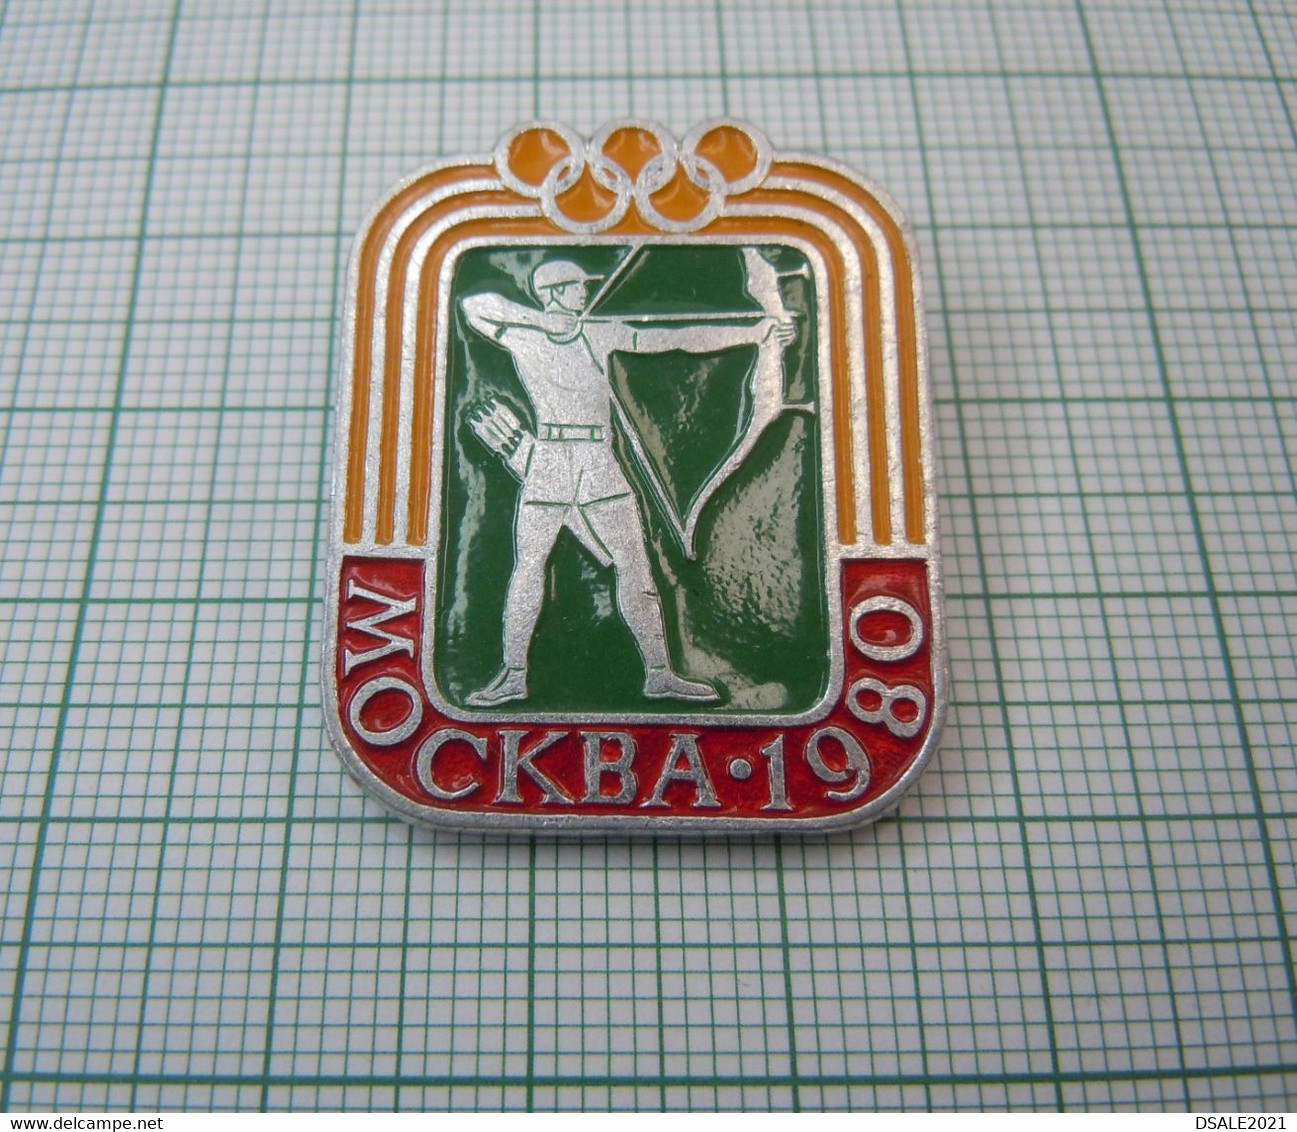 Russia USSR Russland Sowjetunion Moscow 1980 Summer Olympic Archery Sport Mascot Vintage Pin Badge (m985) - Tir à L'Arc